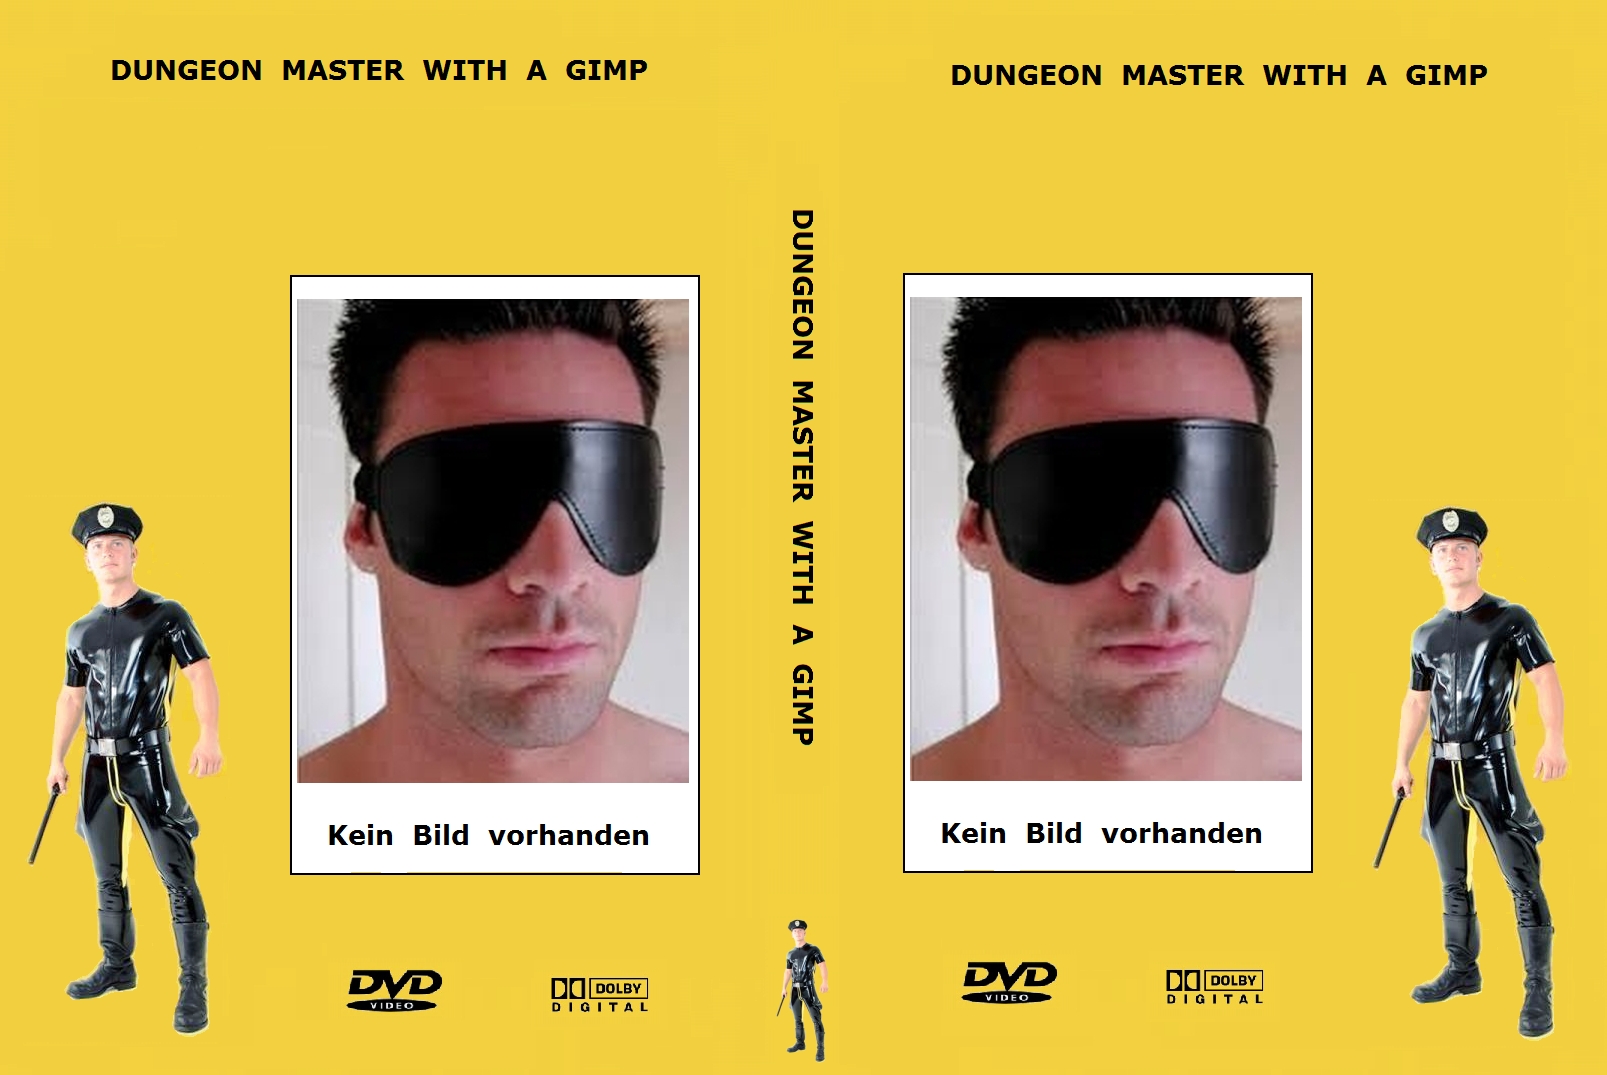 Dungeon Master with a Gimp